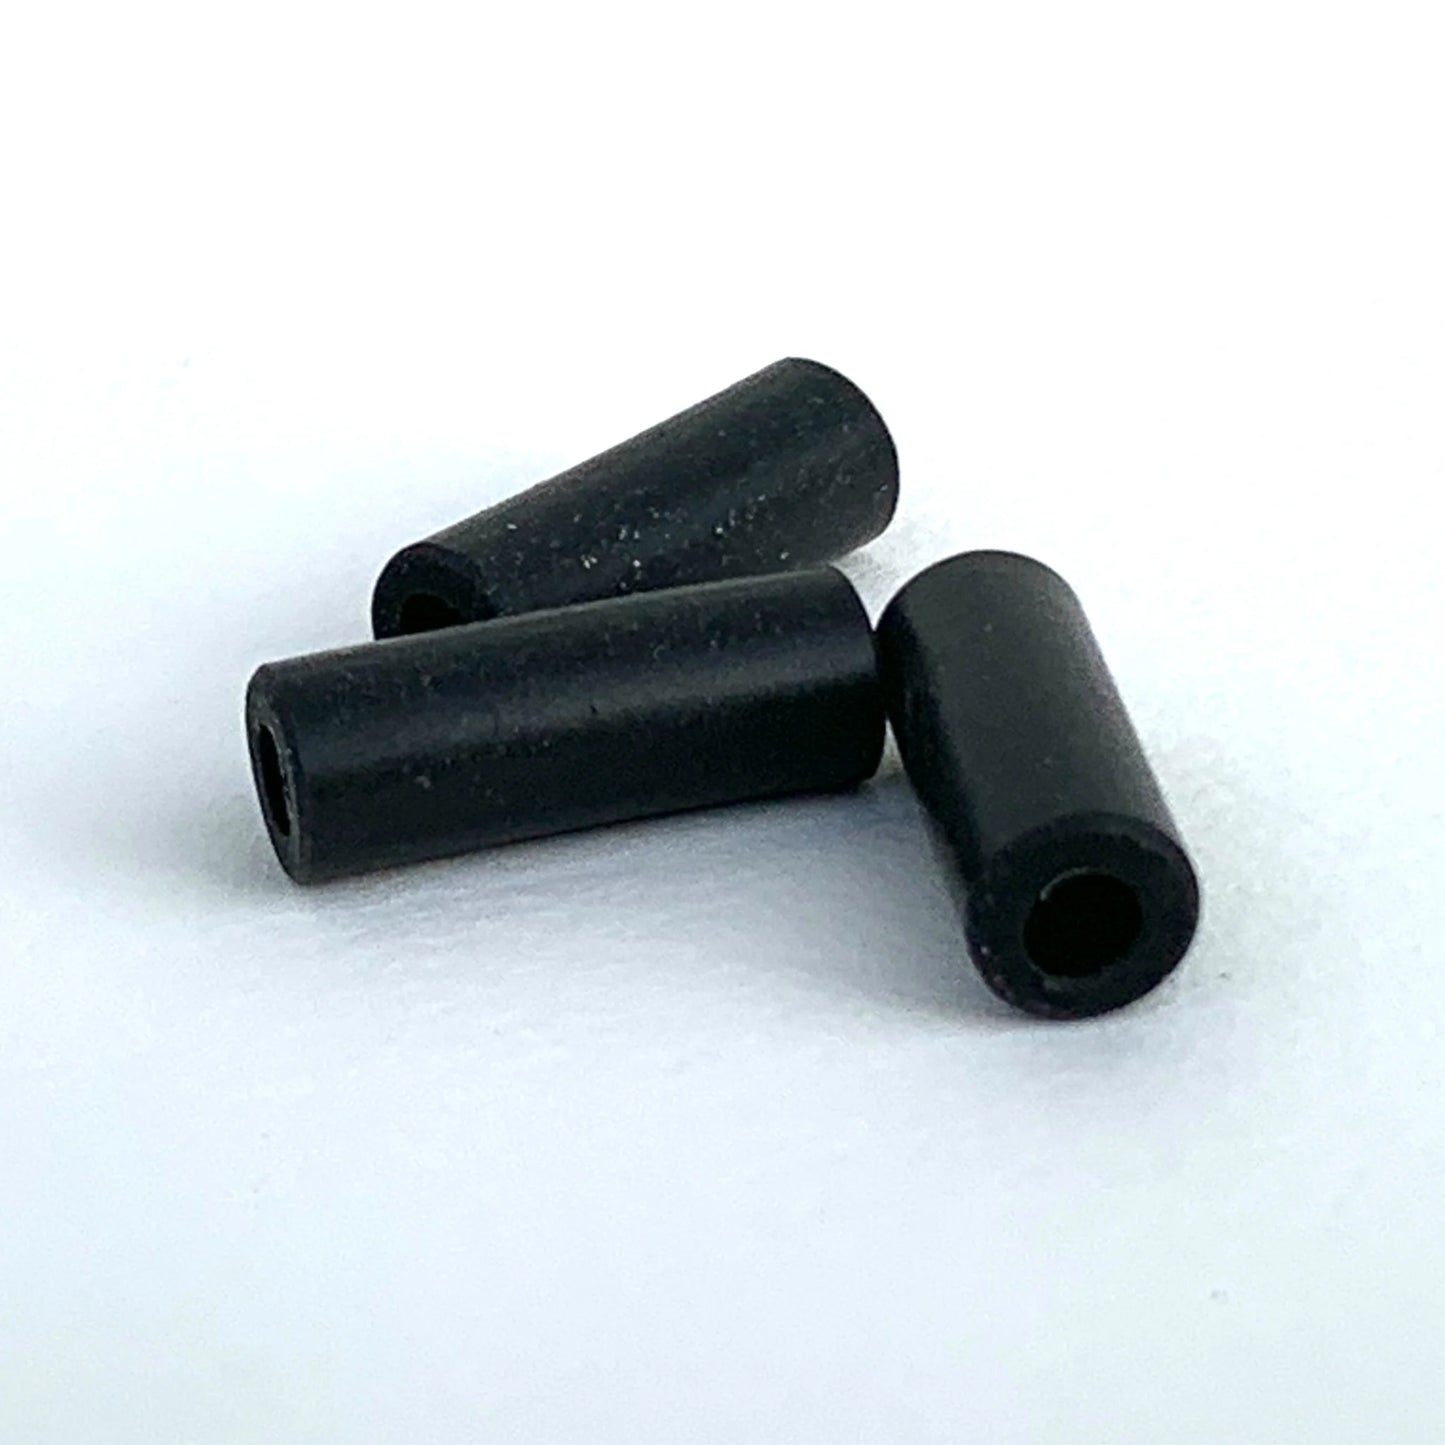 Proto Pipe Mouthpieces (3-pack)